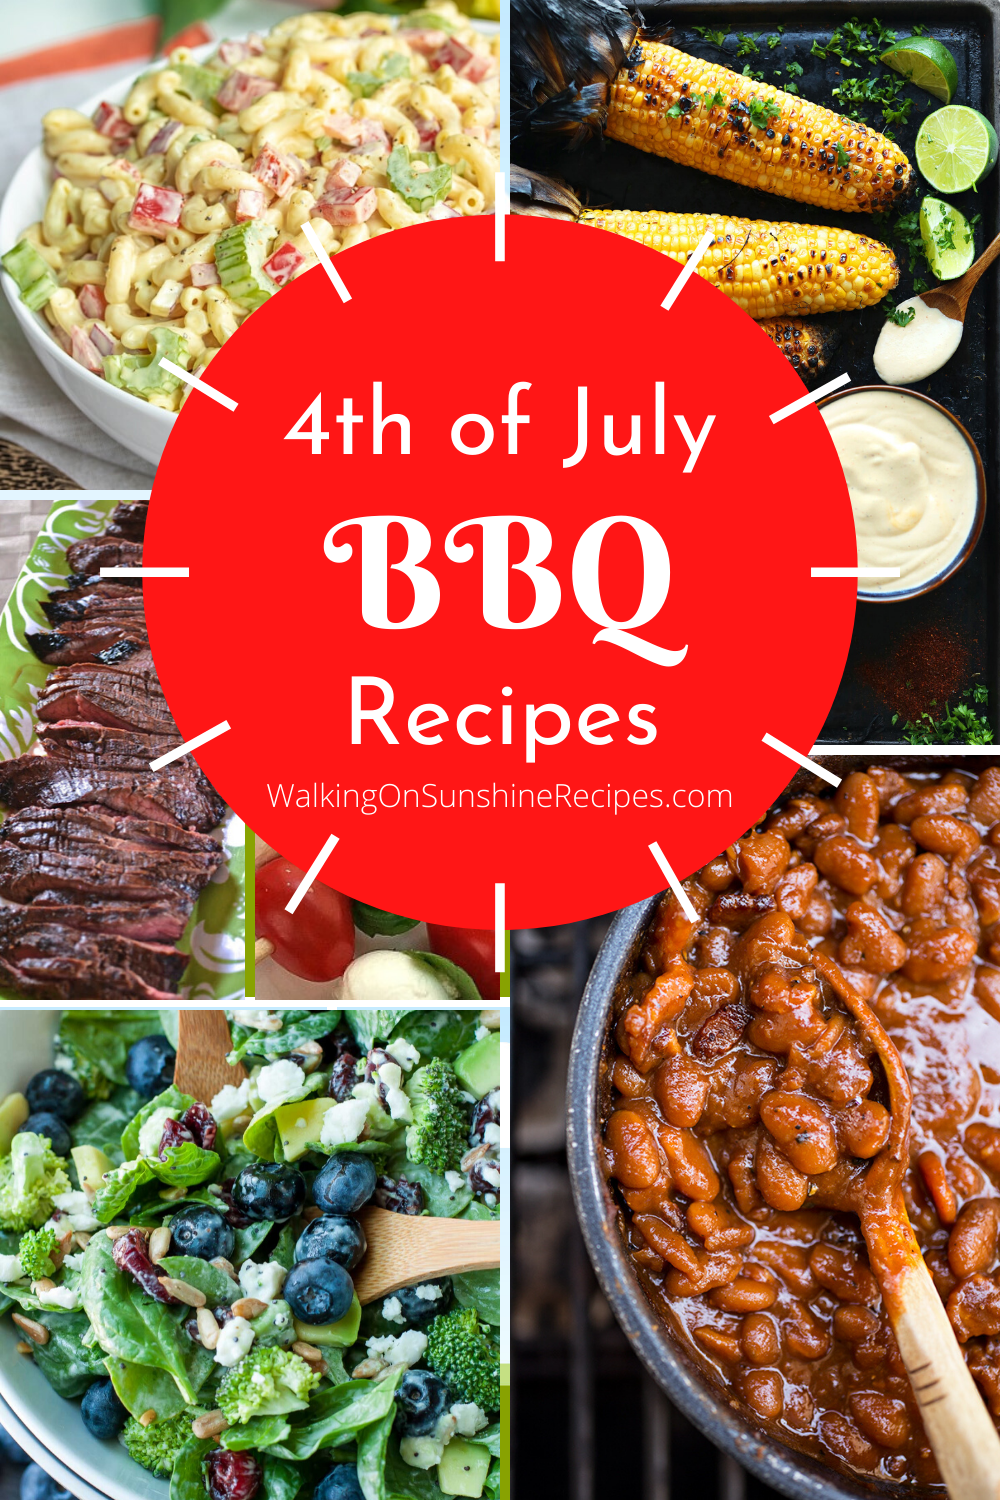 recipes perfect for a 4th of July BBQ